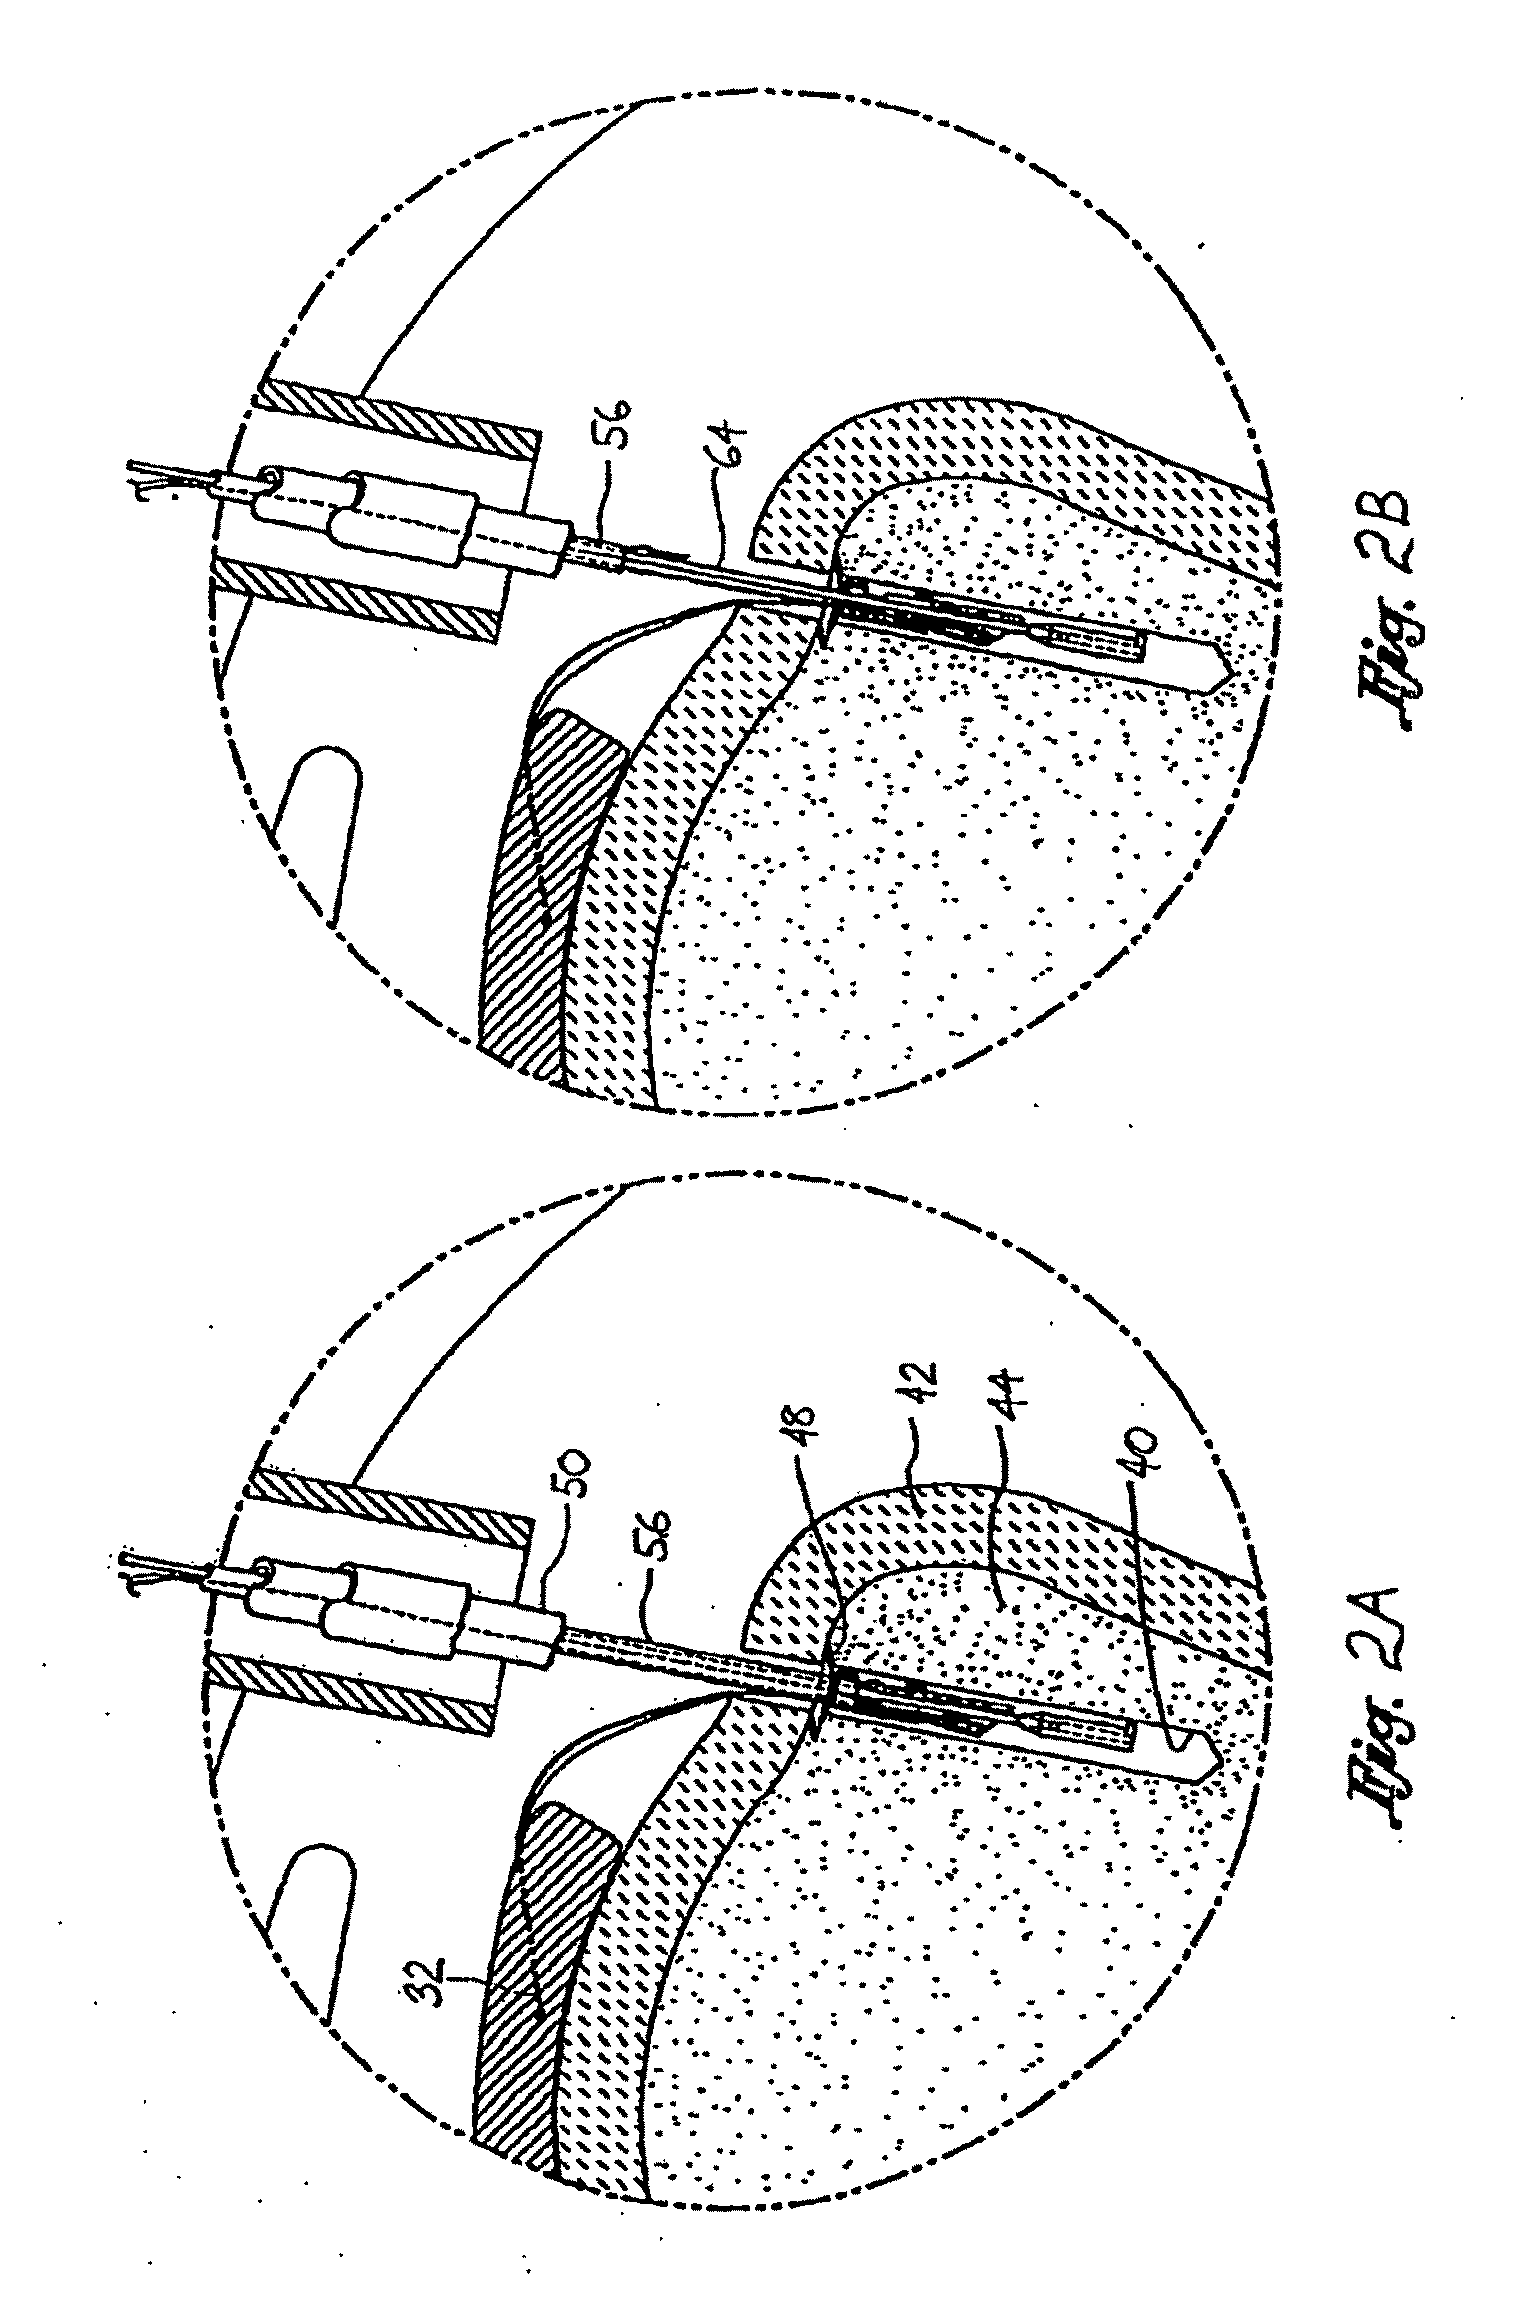 Knotless suture anchoring device having deforming section to accommodate sutures of various diameters